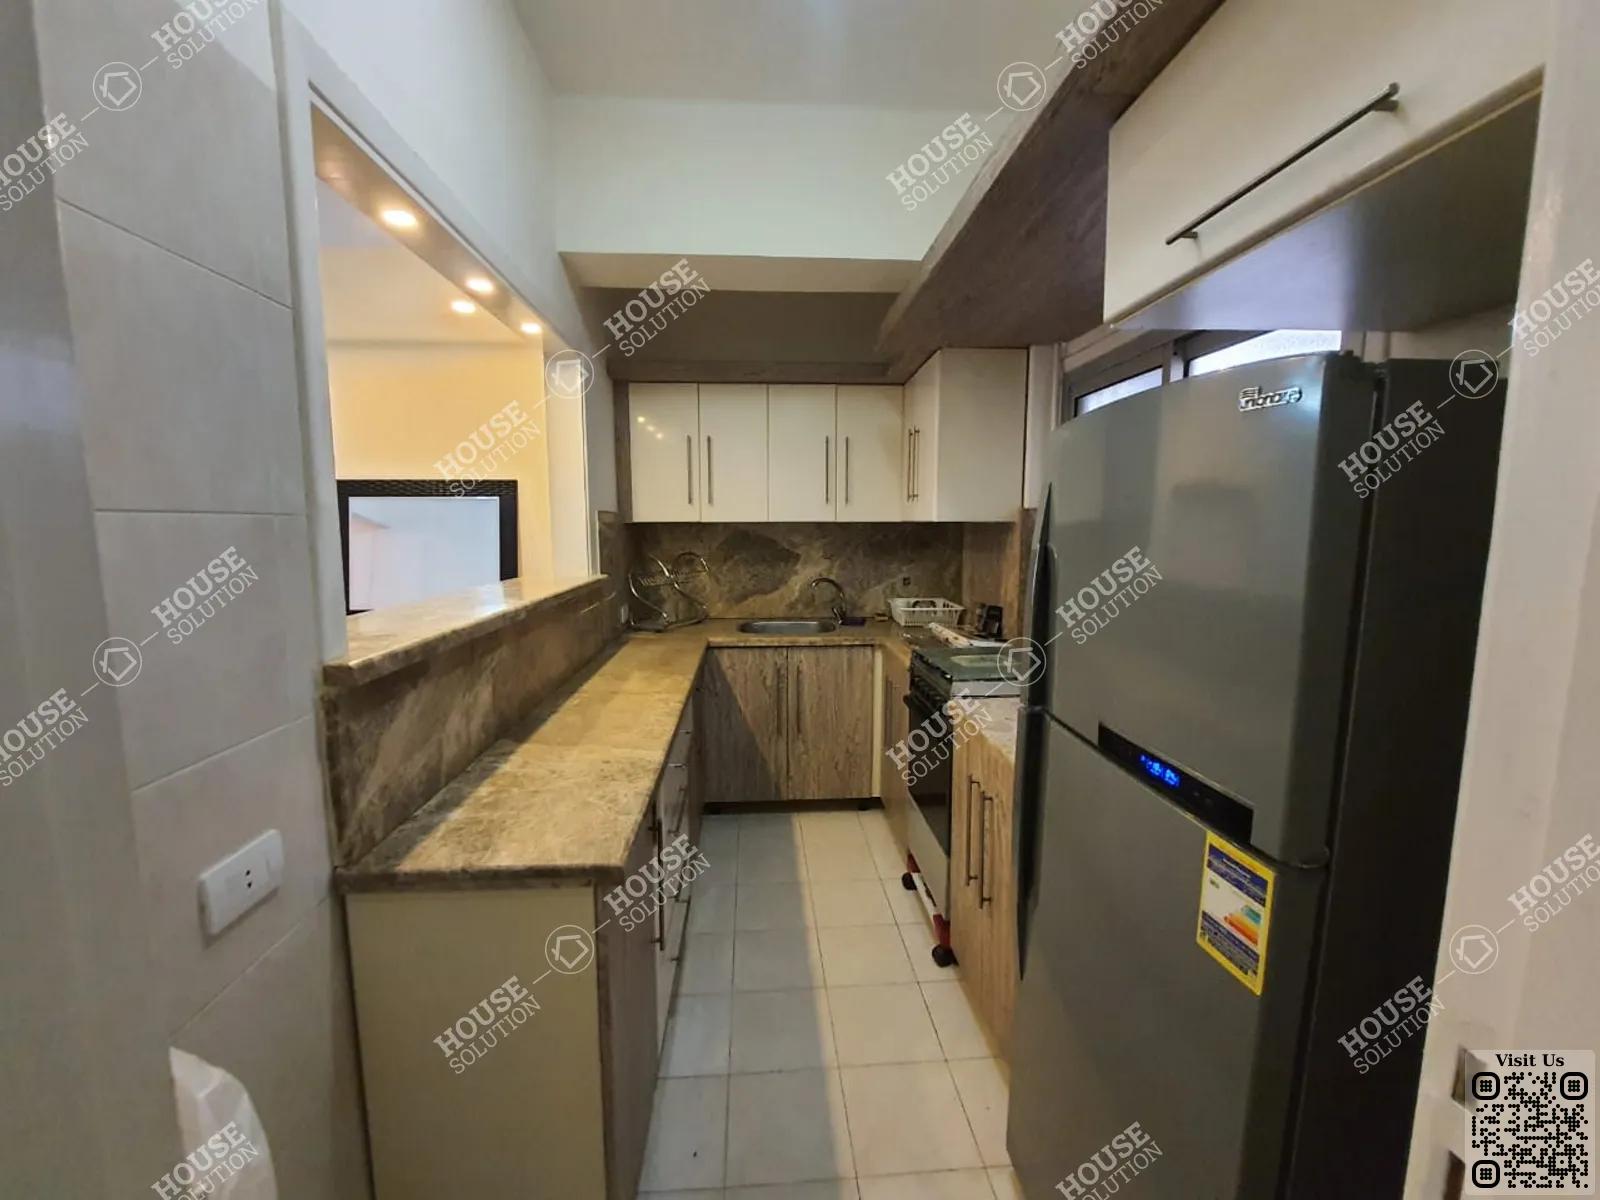 KITCHEN  @ Apartments For Rent In Maadi Maadi Sarayat Area: 150 m² consists of 2 Bedrooms 2 Bathrooms Furnished 5 stars #3527-1